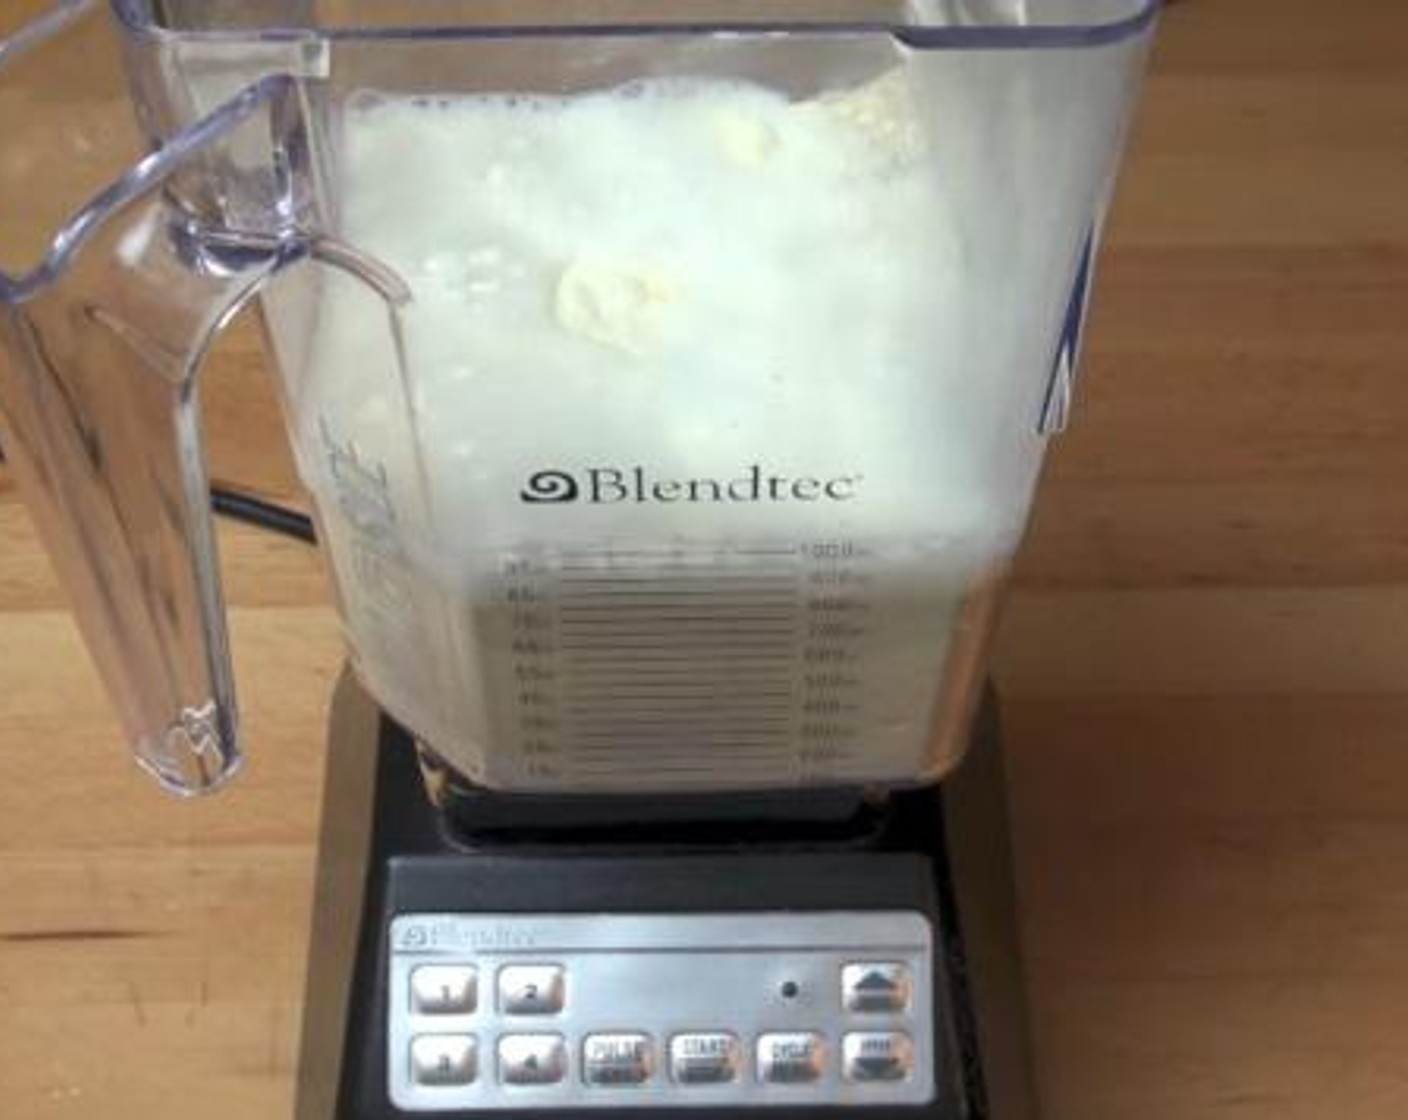 step 1 Inside a blender, mix together the Caster Sugar (1 cup), Milk Powder (2 cups), and Water (1 cup).